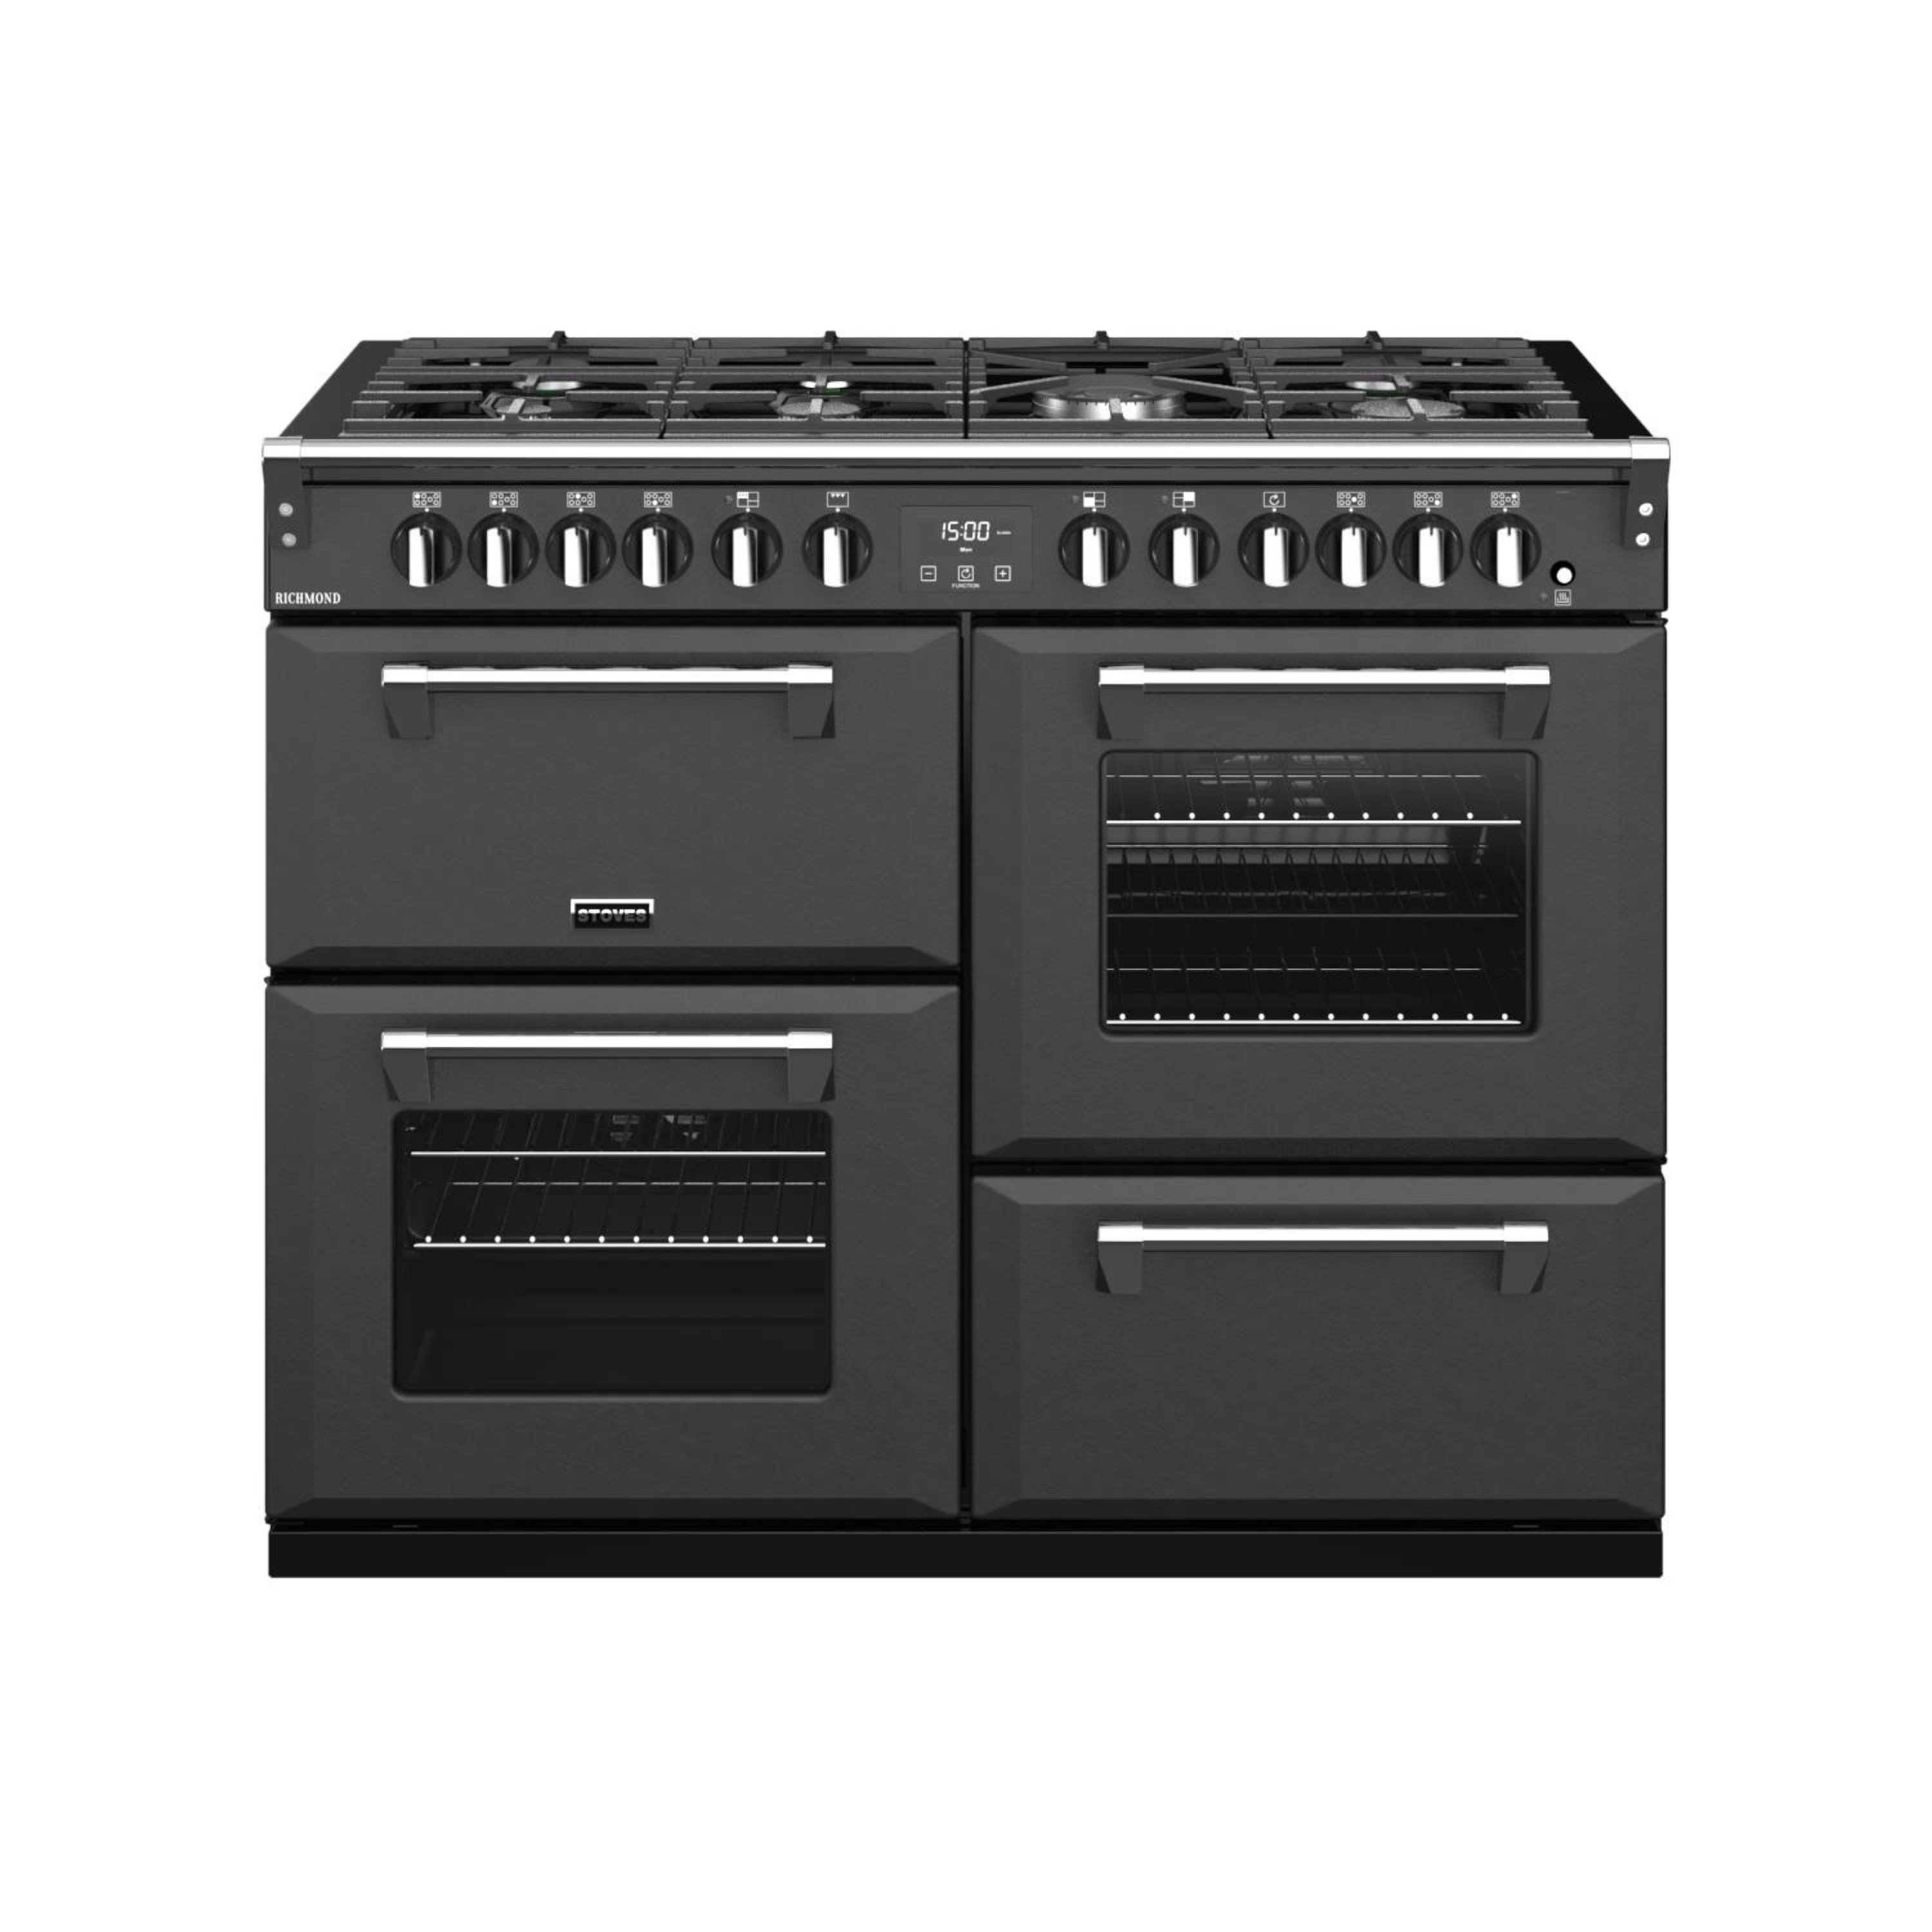 110cm dual fuel range cooker with a 7 burner gas hob, conventional oven & grill, multifunction main oven, fanned second oven, and dedicated slow cook oven